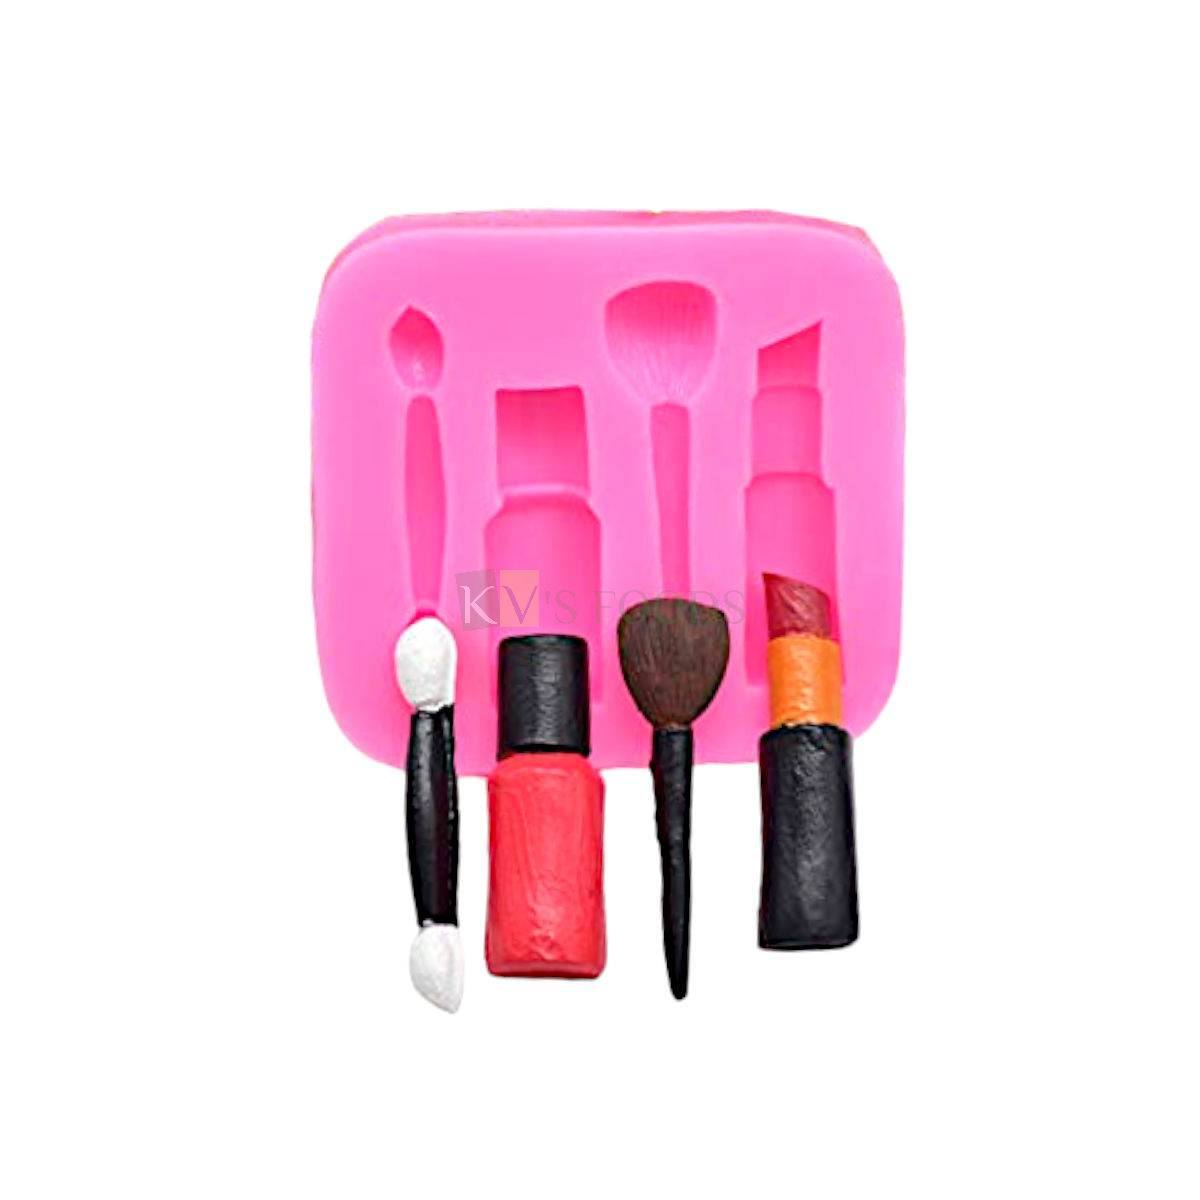 1 PC Silicone Fondant Makeup Brush Nail Polish Lipstick Make Up Tool Chocolate Mould 4 Cavity, Girls Ladies Womans Birthday Theme, Makeup Beauty Cosmetic Flexible Moulds DIY Cake Decorating Molds